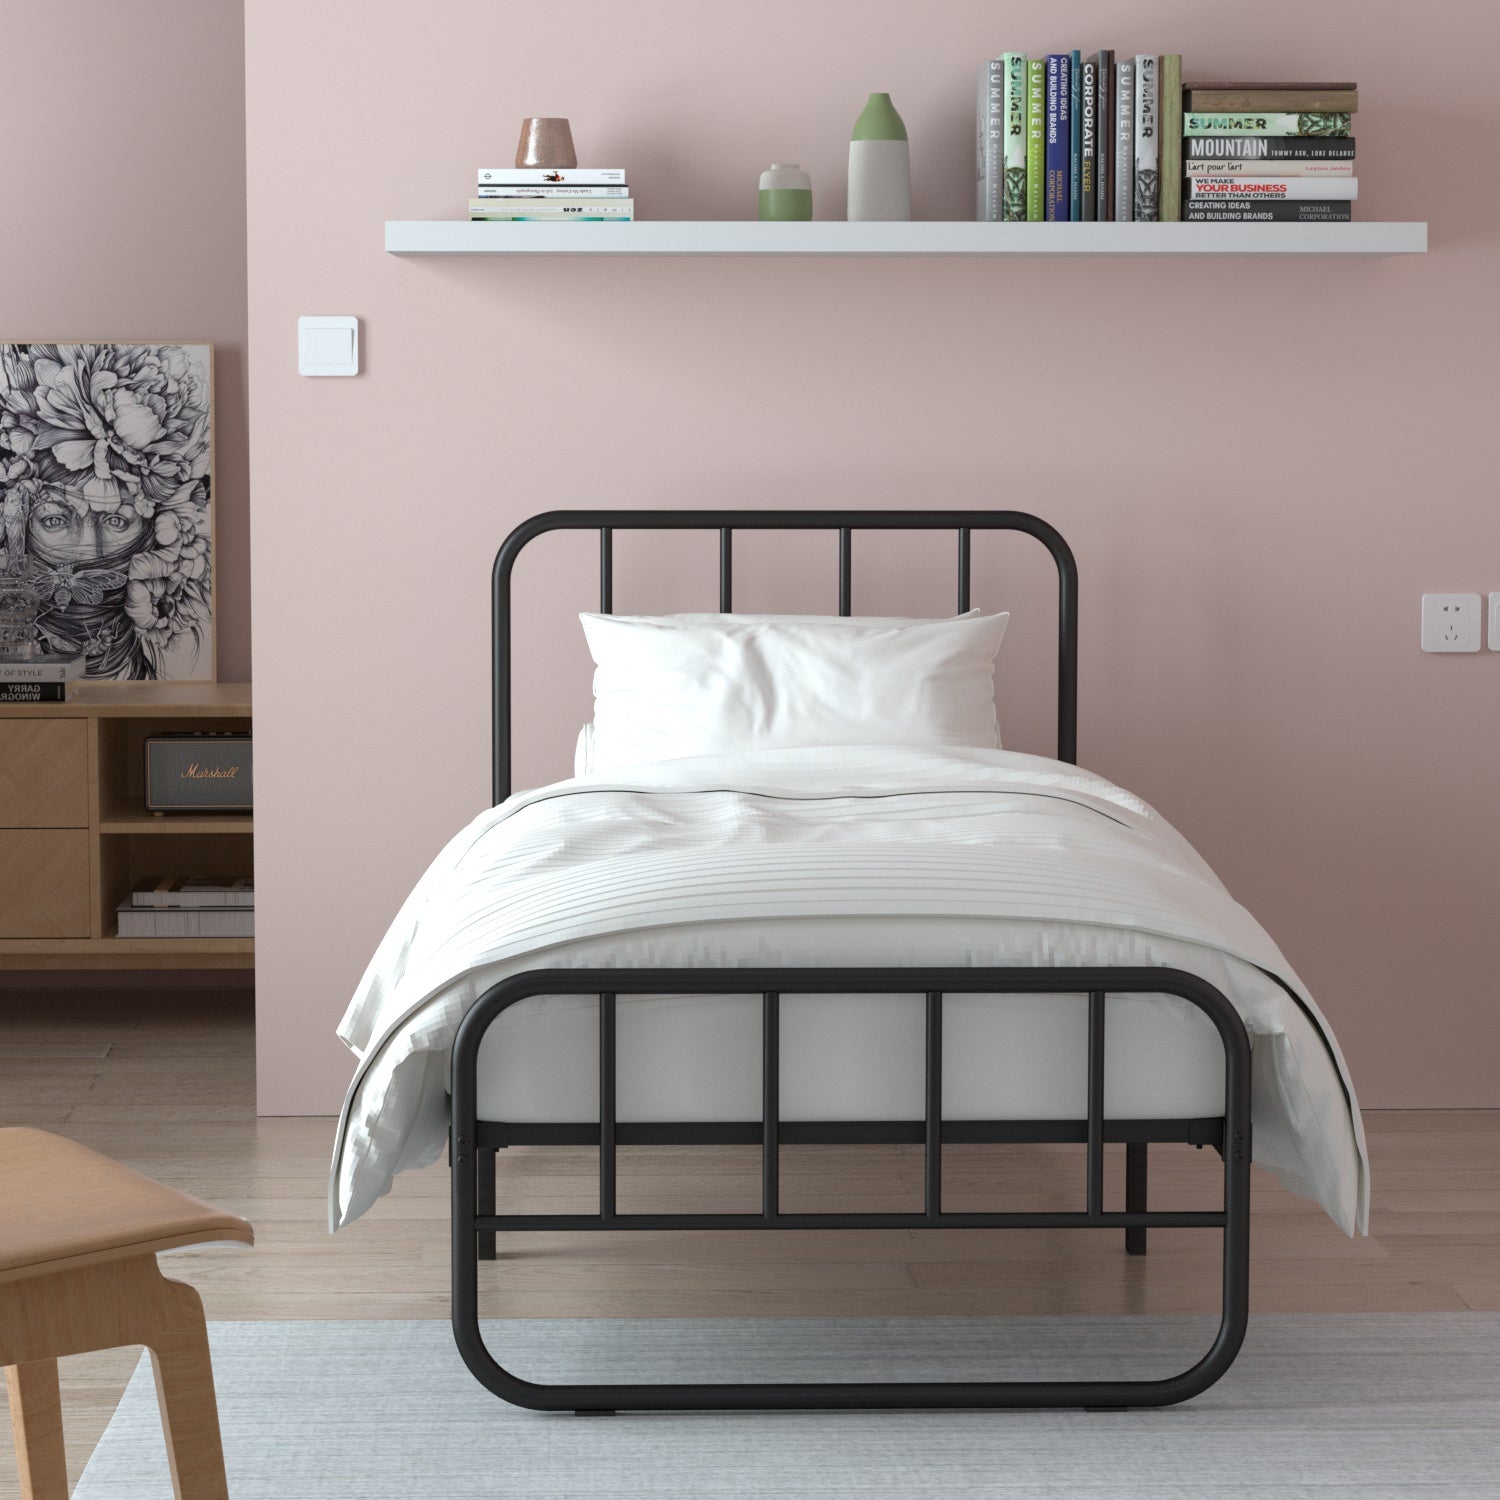 VENI Metal Bed Frame with Headboard Easy to Assemble